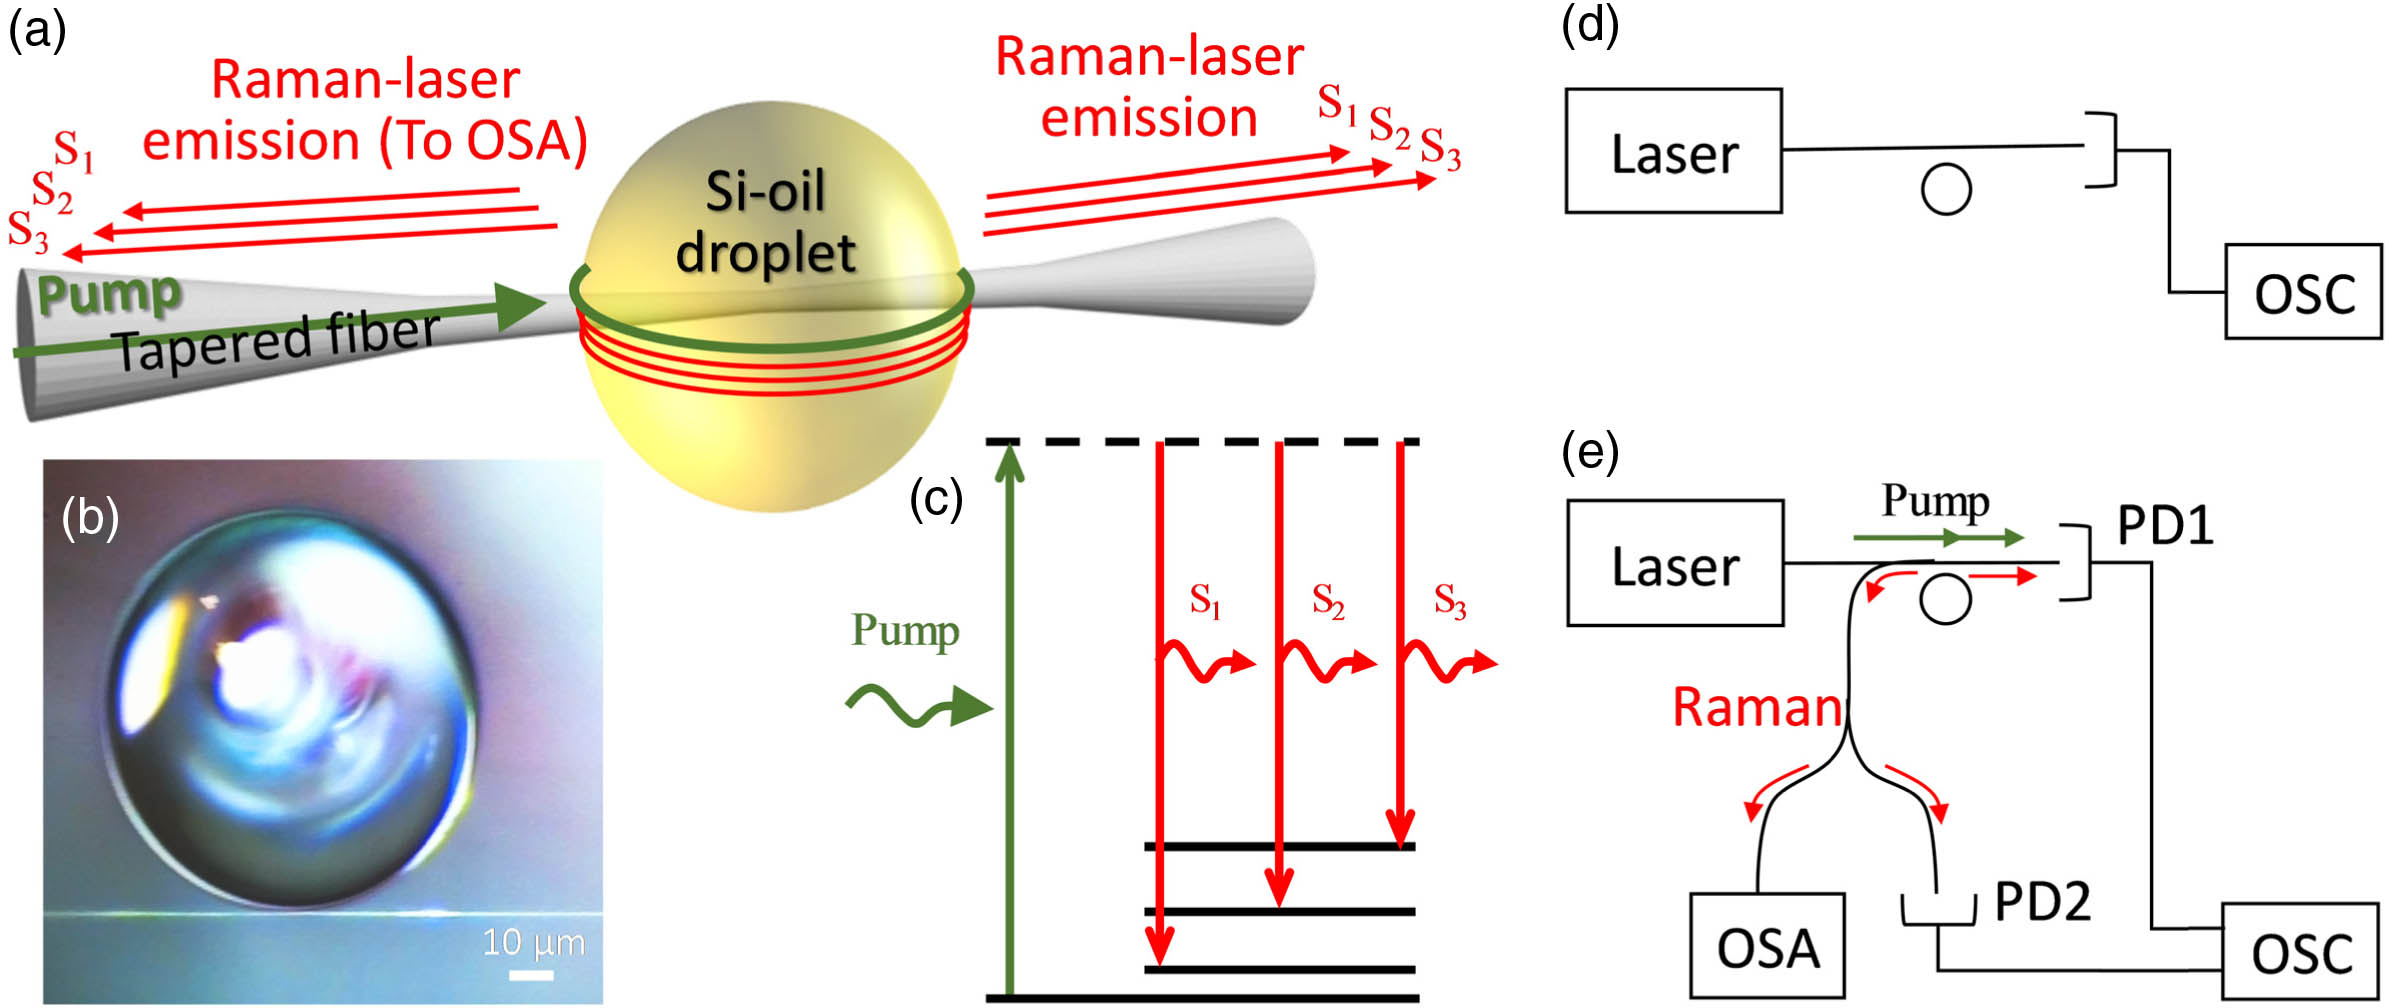 Experimental setup. (a) Coherent emission of multiple Raman laser lines from a liquid droplet resonator. The green arrow represents the pump; red arrows represent forward and backward stimulated Raman emission. (b) Micrograph of our 78 μm diameter silicone oil droplet coupled to a tapered fiber (shown below). (c) Energy-level diagram illustrating three states involved in the Raman spectra. (d) Experimental setup for characterizing the resonator’s optical quality factor by slowly scanning the laser frequency through resonance and measuring the bandwidth of the depth in the transmission. Also, fast scan through resonance similarly allows measuring of the optical quality, but at the temporal domain, relying on the optical ringdown effect. (e) Experimental setup for measuring Raman laser, where the backward Raman laser is directed to an optical spectrum analyzer (OSA) and to a photodetector (PD).